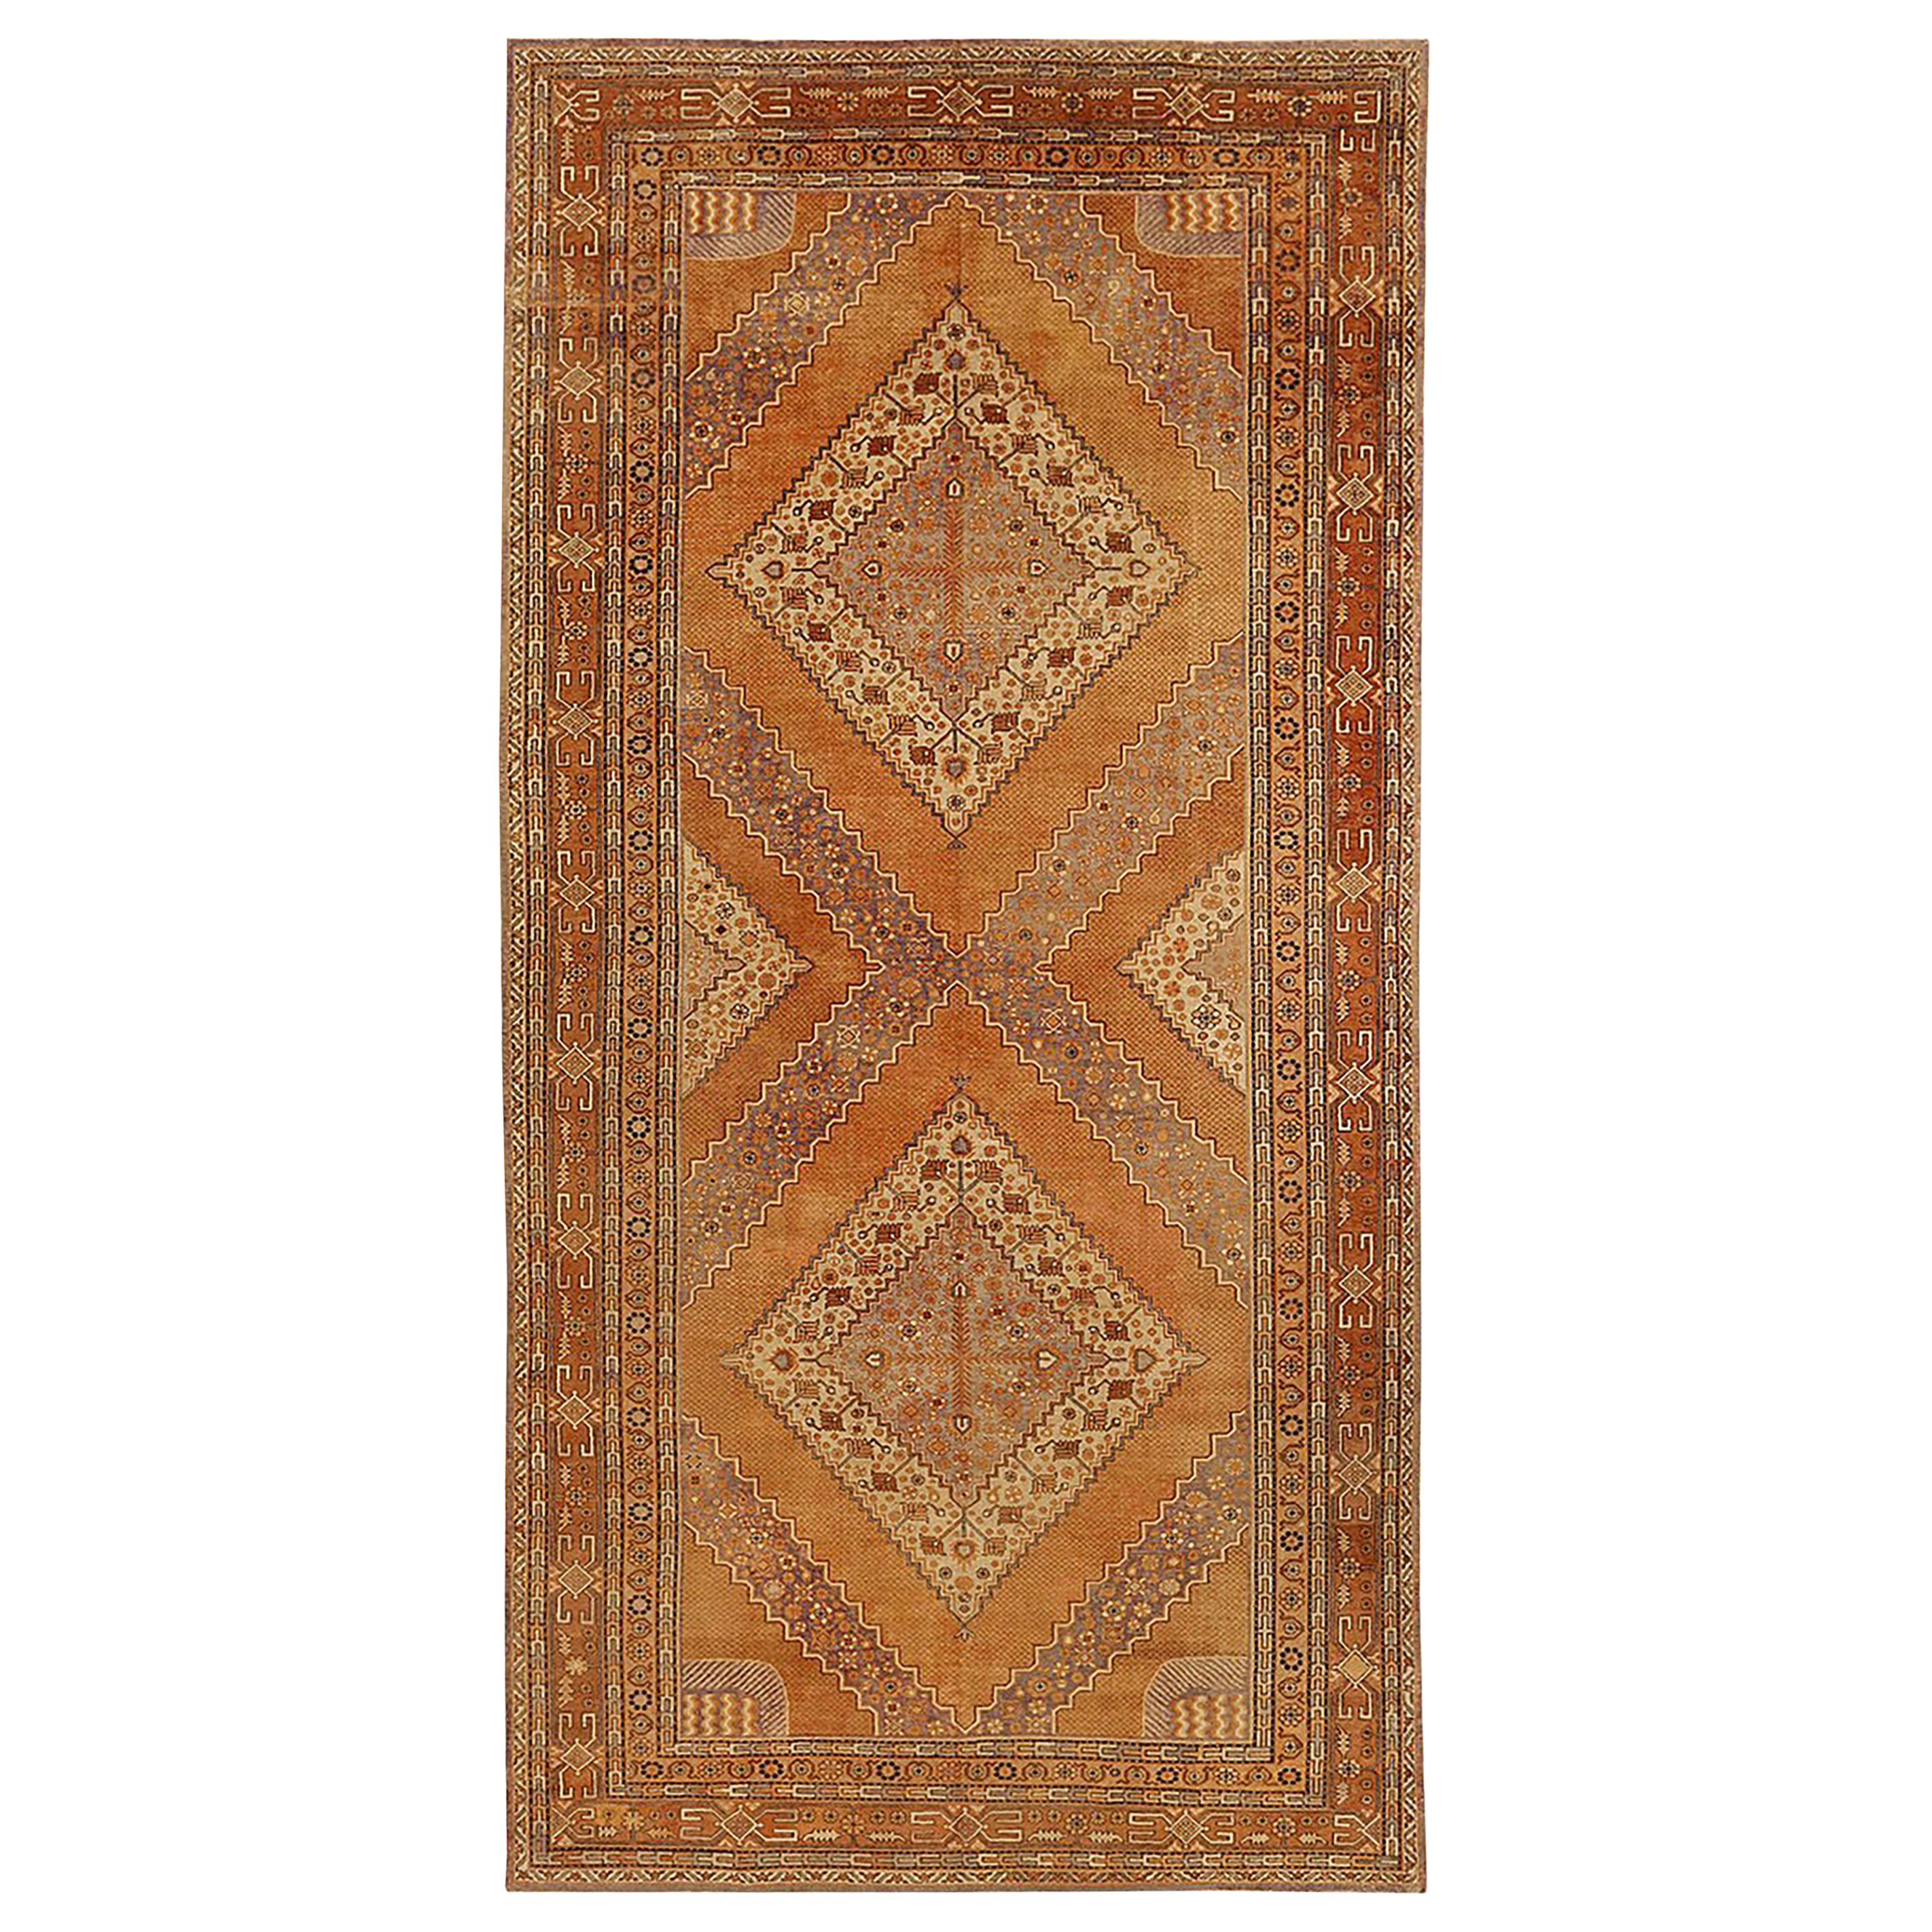 Antique Russian Khotan Rug with Beige and Brown Diamond Medallions